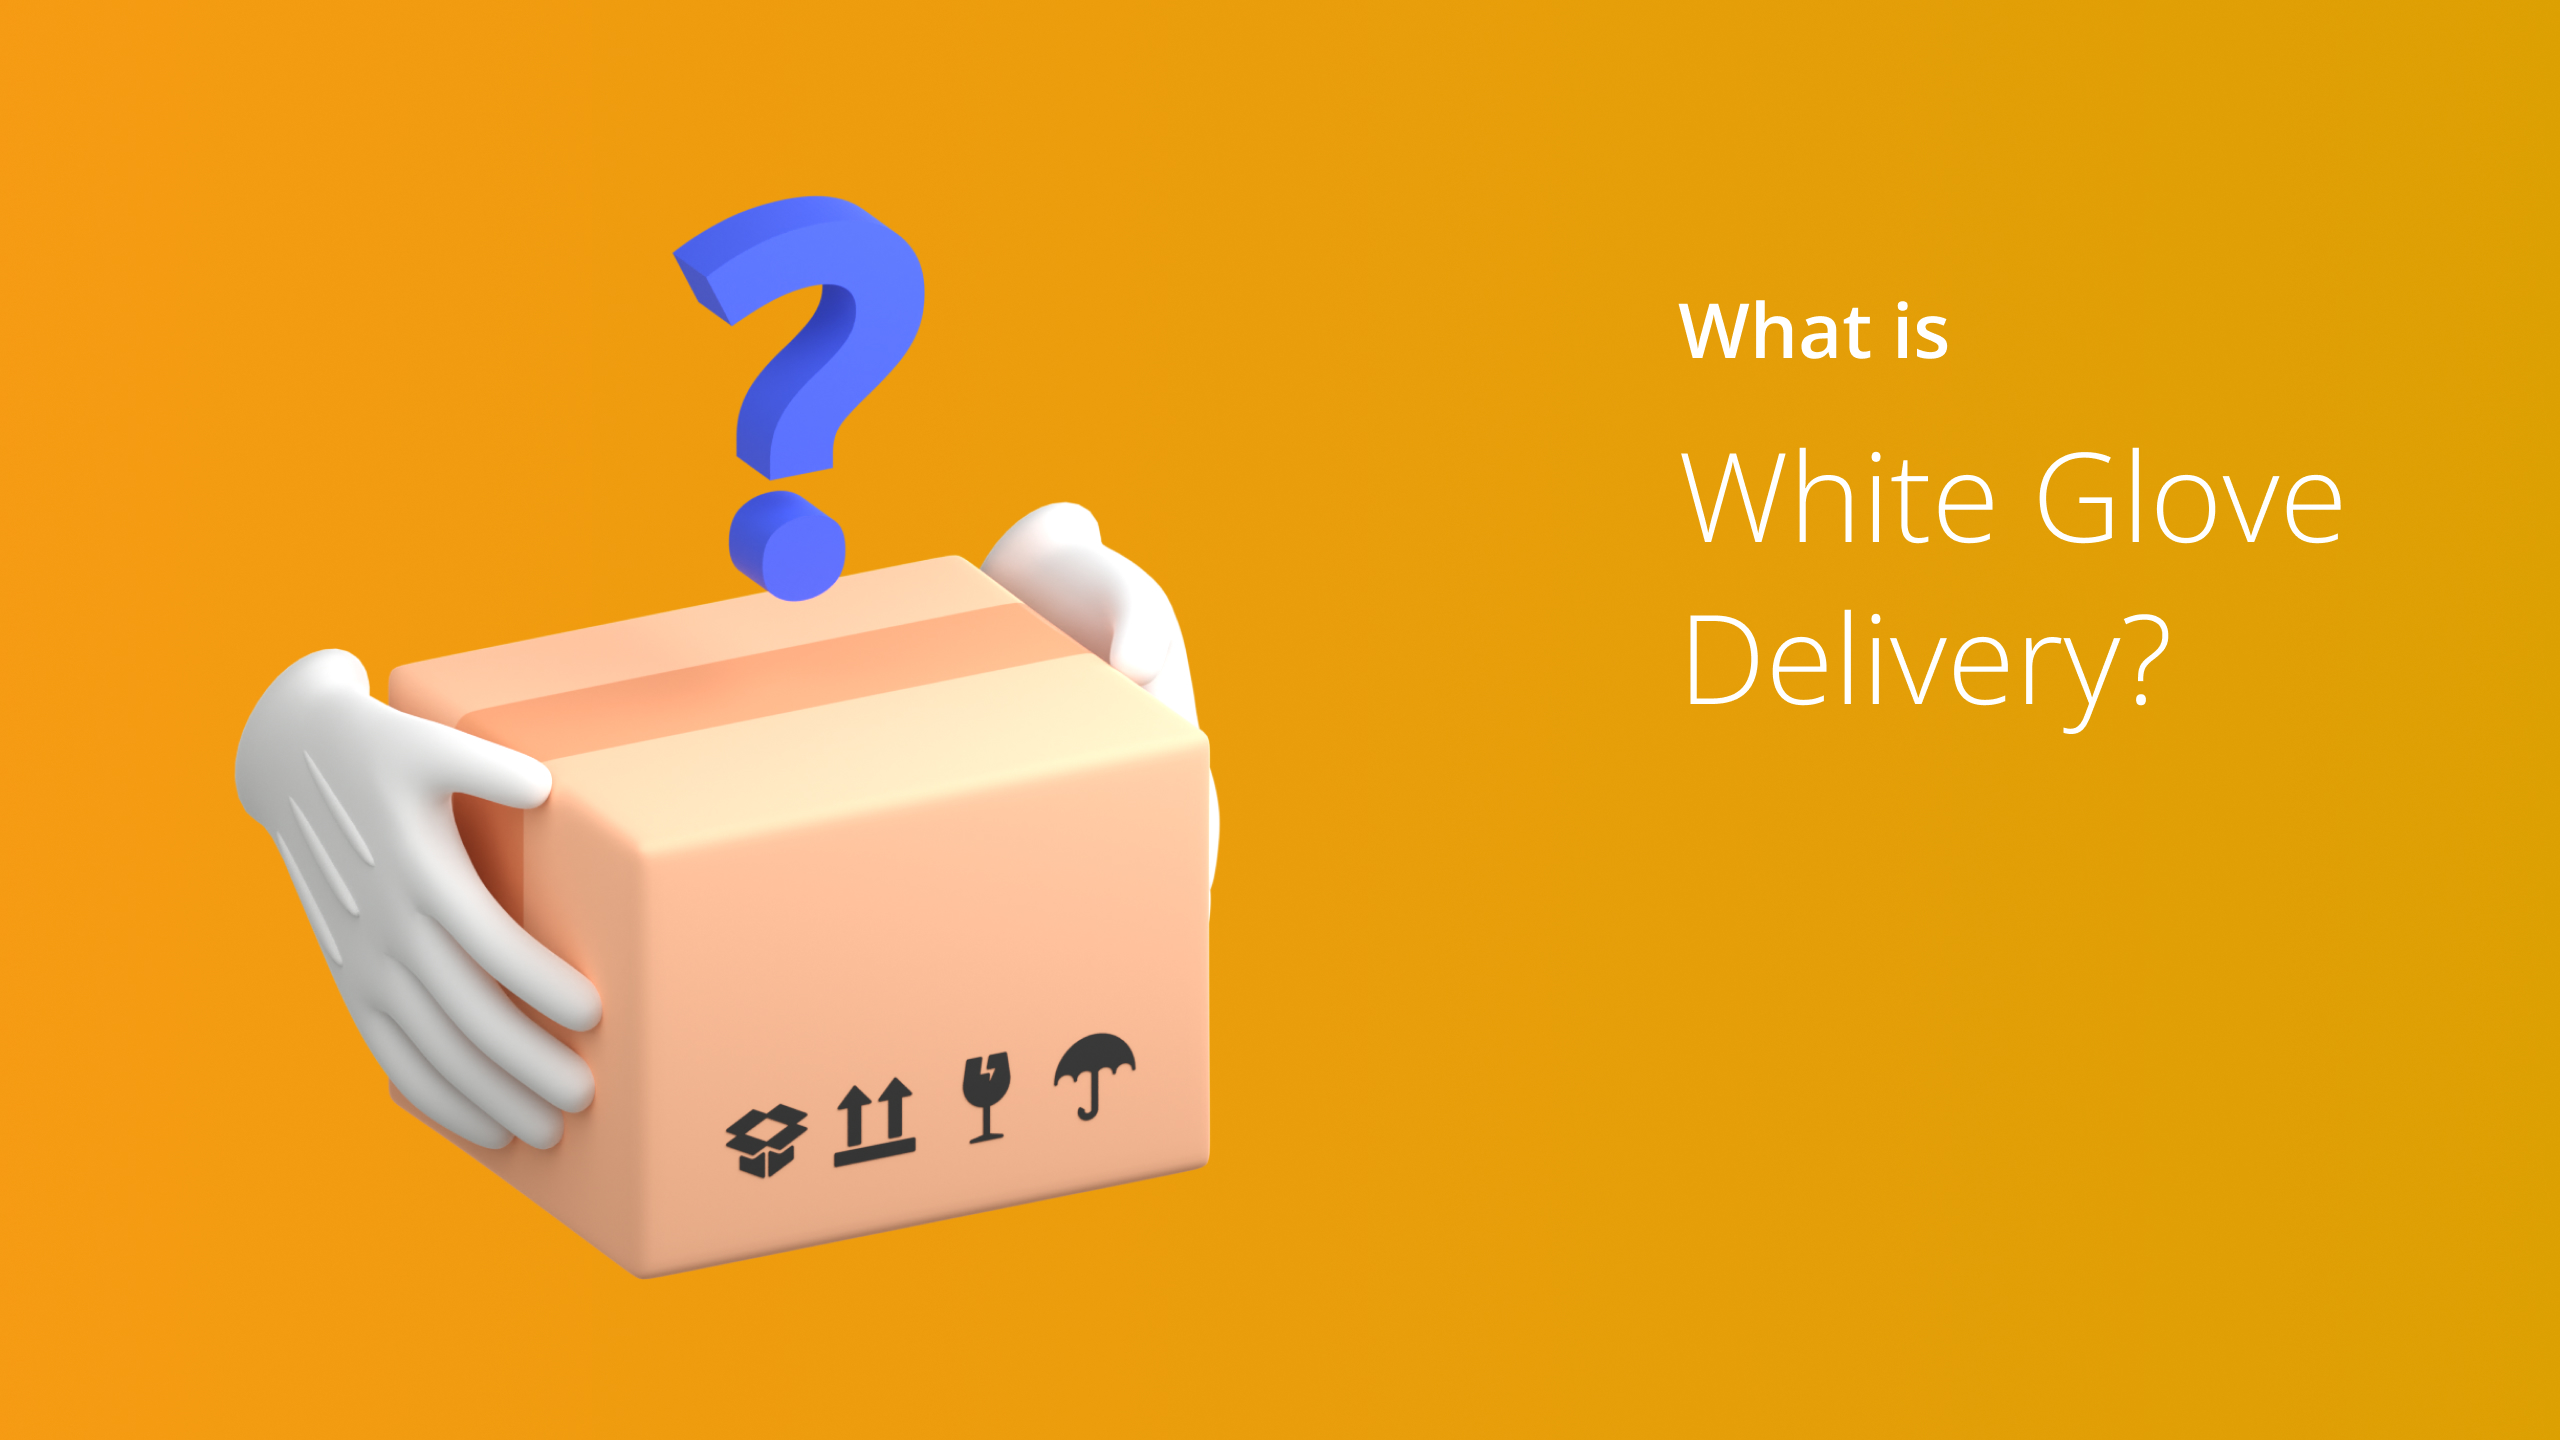 Custom Image - What is White Glove Delivery?